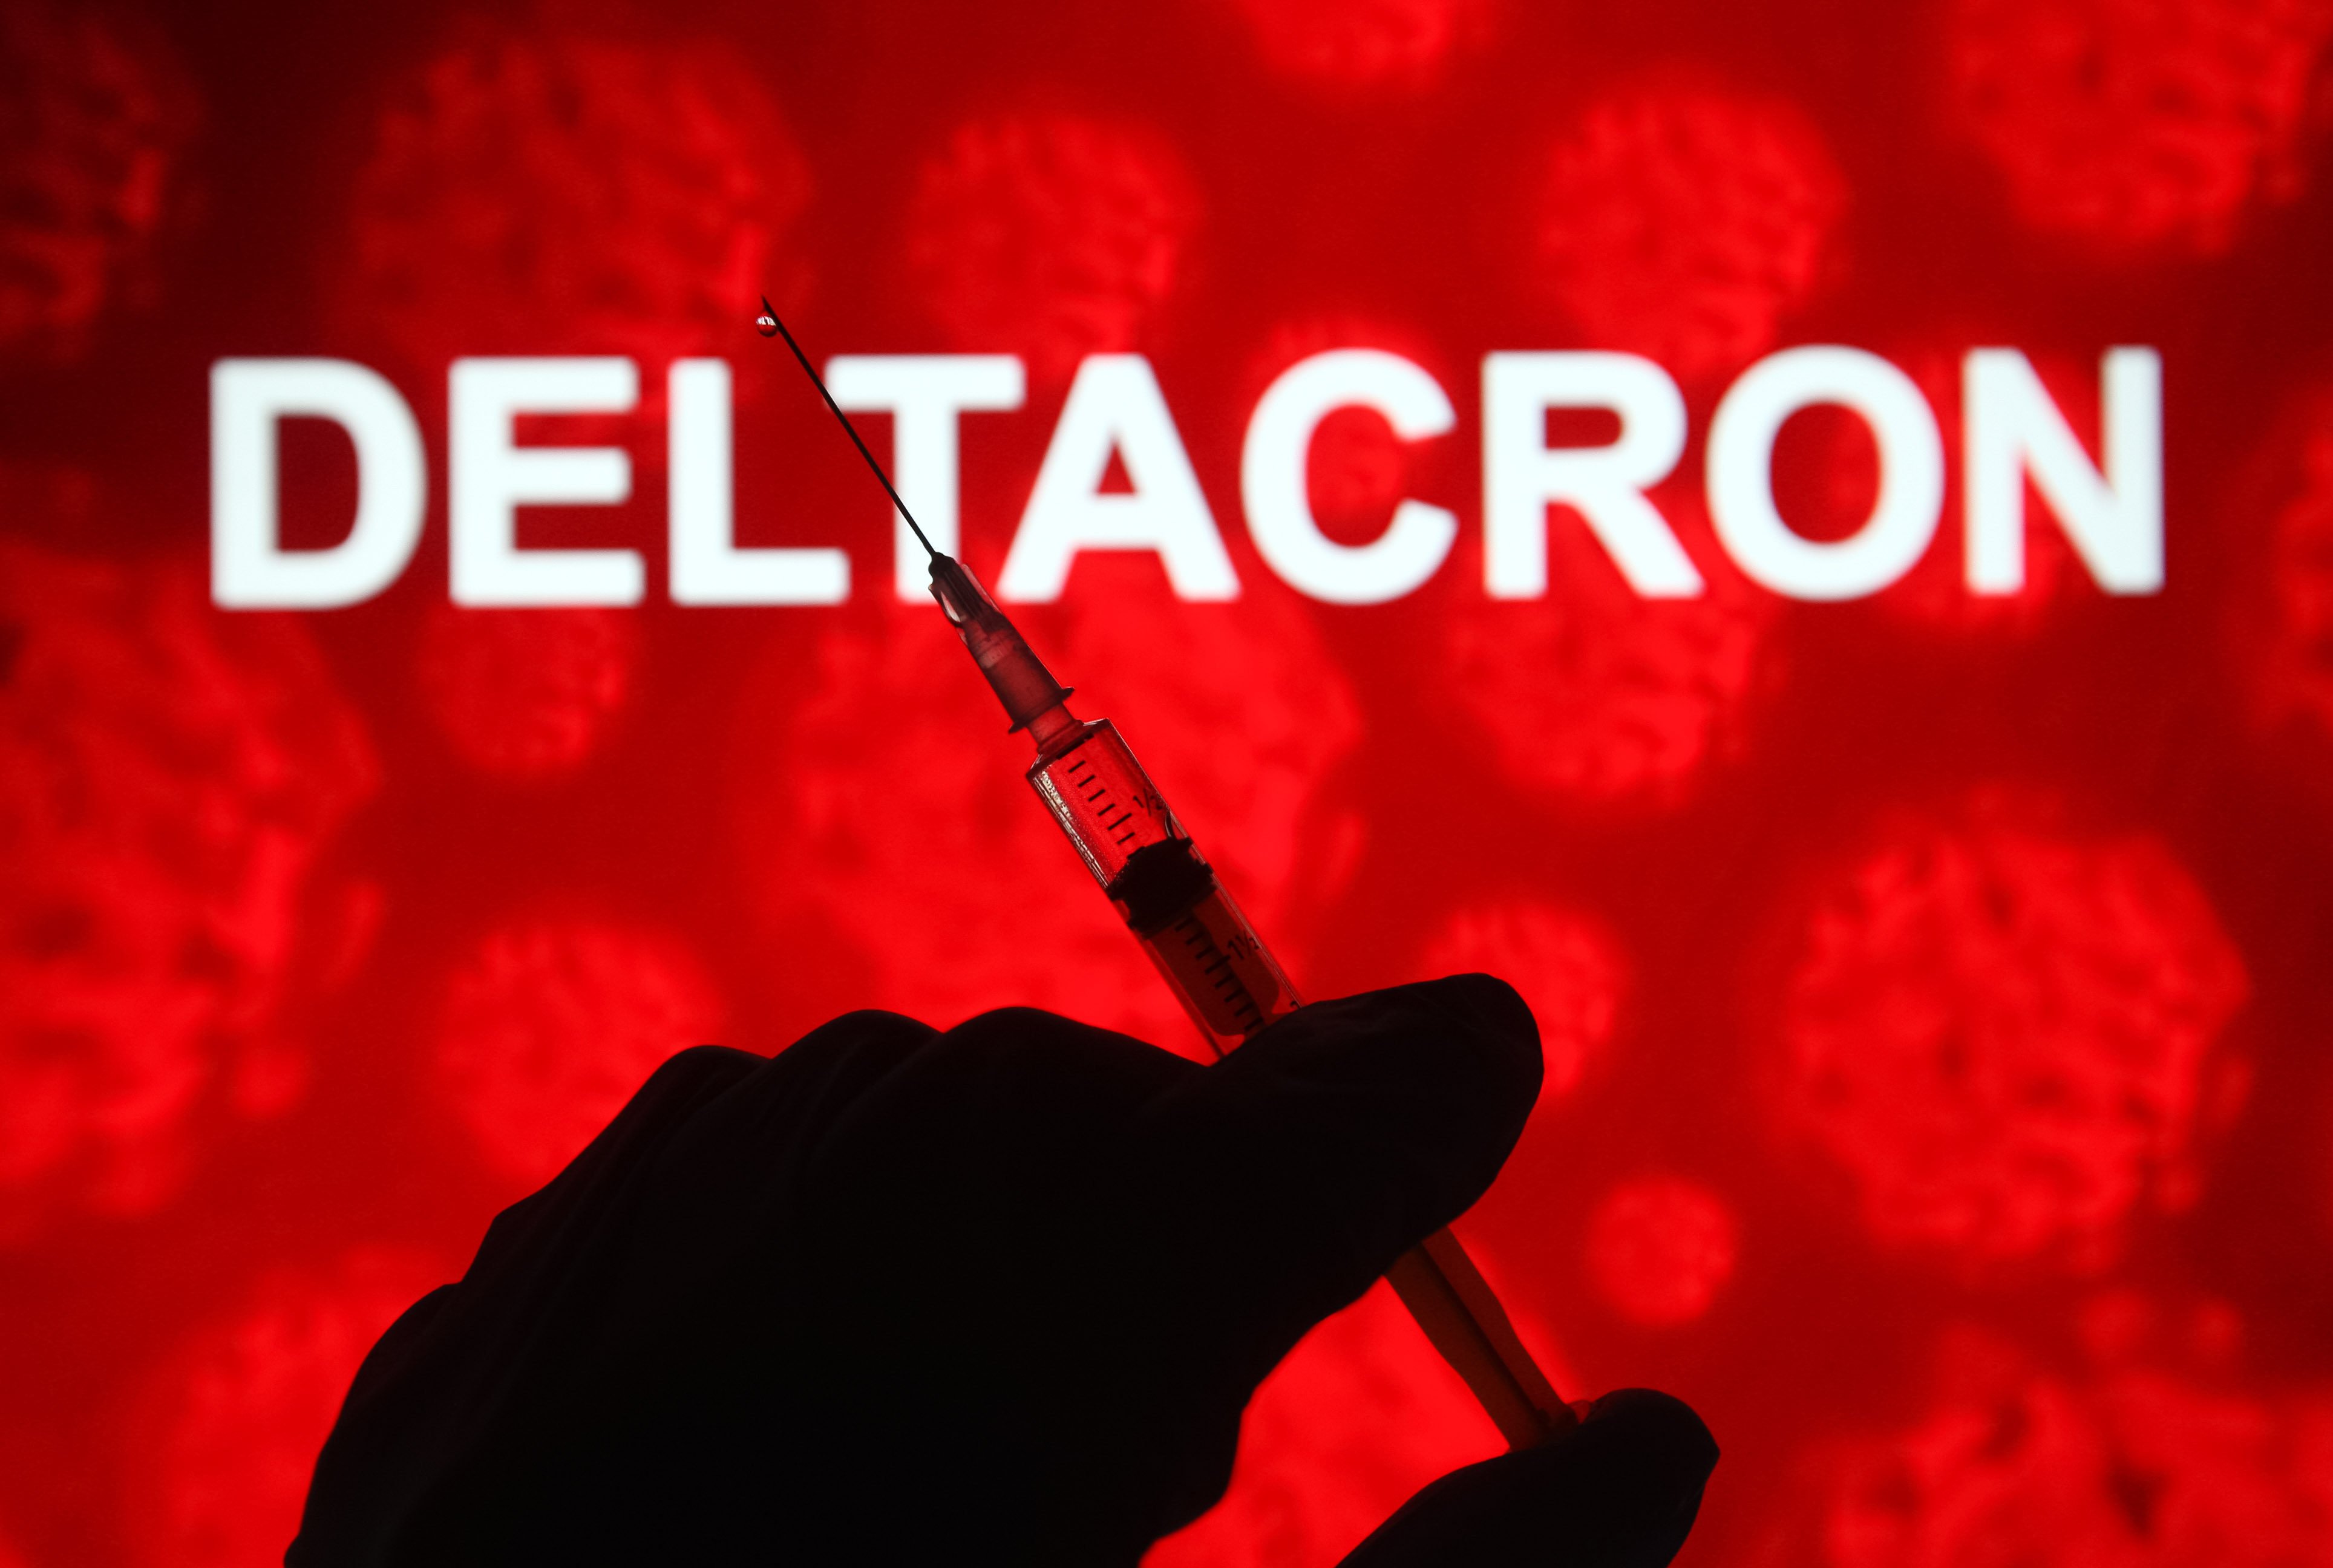 A scientist in Cyprus says he has discovered a new coronavirus variant named ‘Deltacron’. Photo: Pavlo Gonchar/SOPA Images via ZUMA Press Wire/dpa